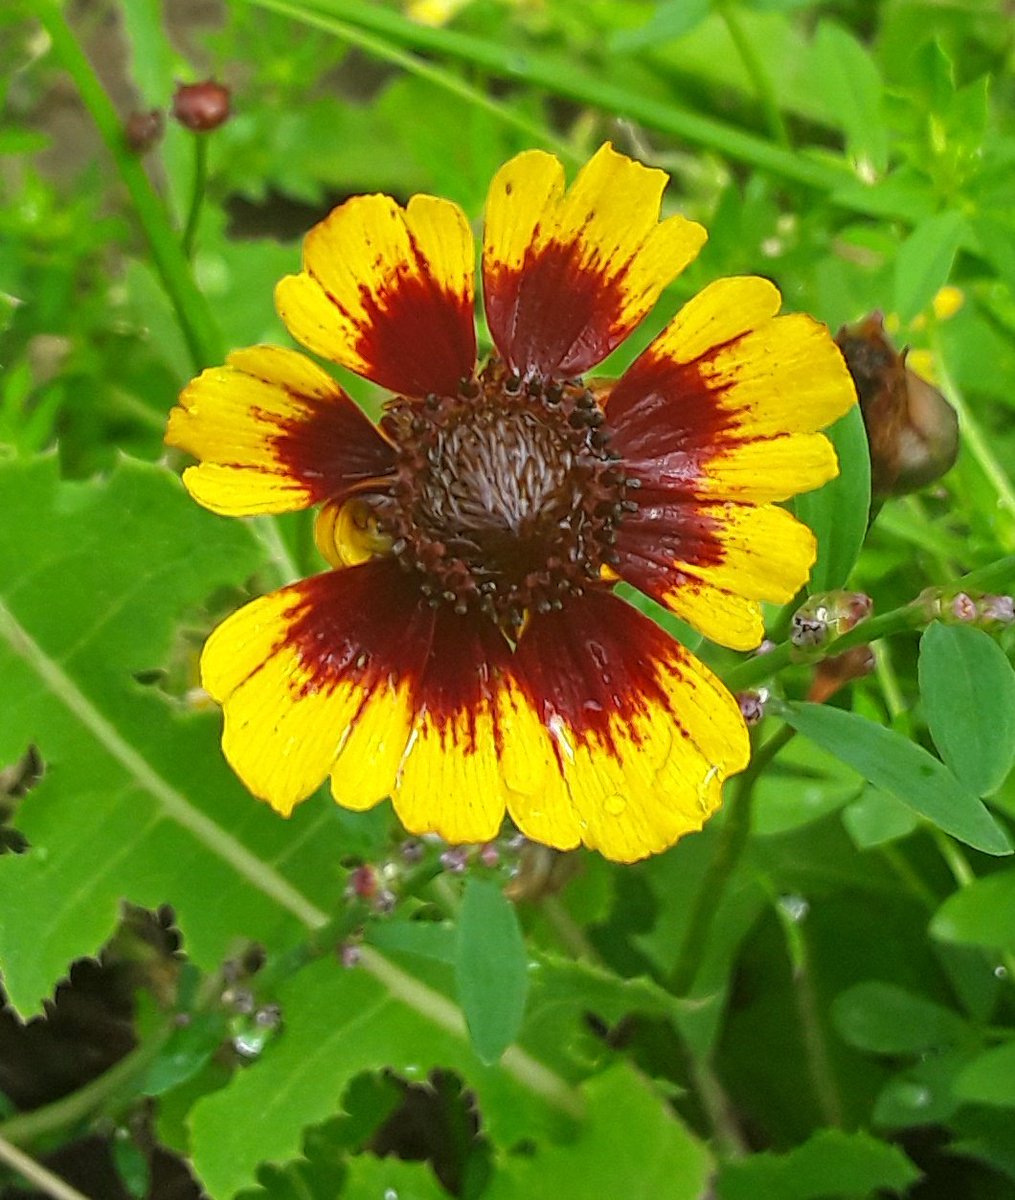 I think plains coreopsis is my new favourite wildflower